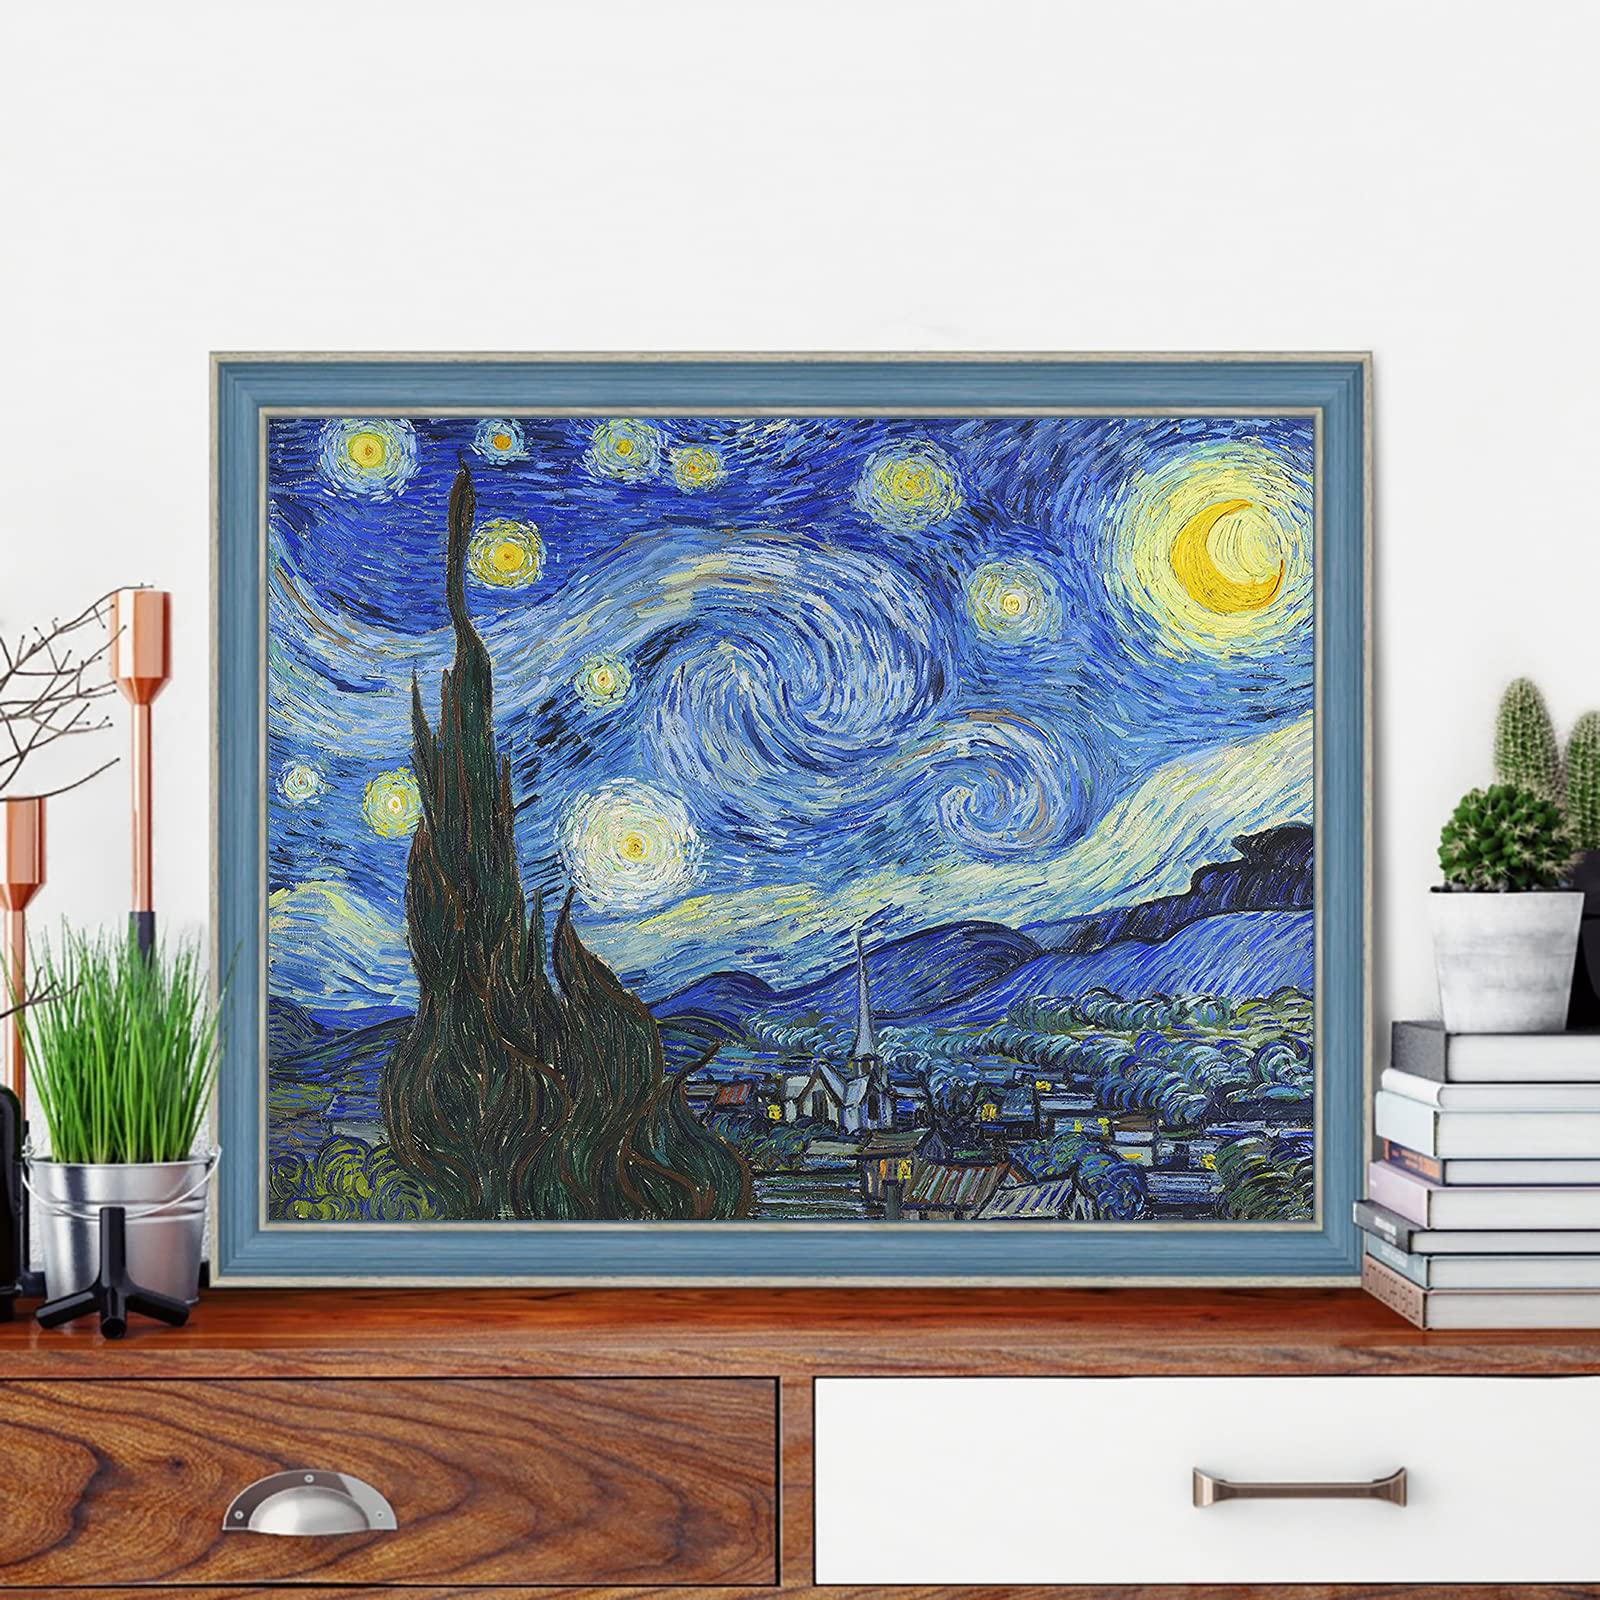 veguude paint by numbers for adults and kids beginner, 4 pack van gogh starry night painting by number kits on canvas, withou